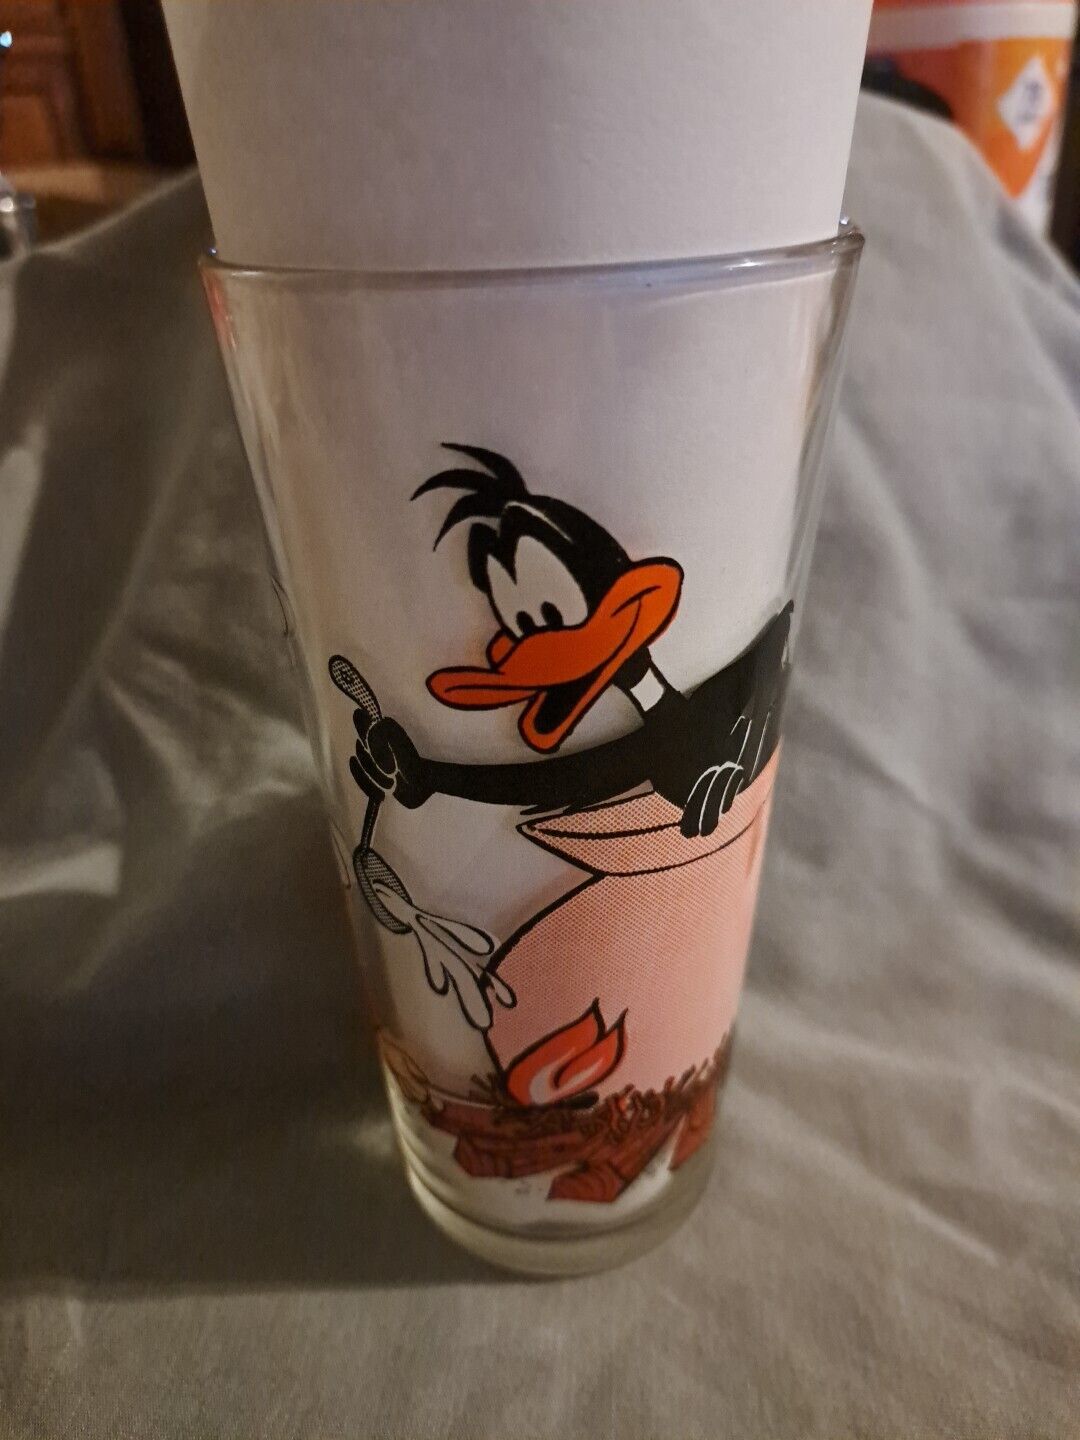 Vtg 1976 PORKY PIG DAFFY DUCK SOUP Pot Looney Tunes Pepsi Collector Glass